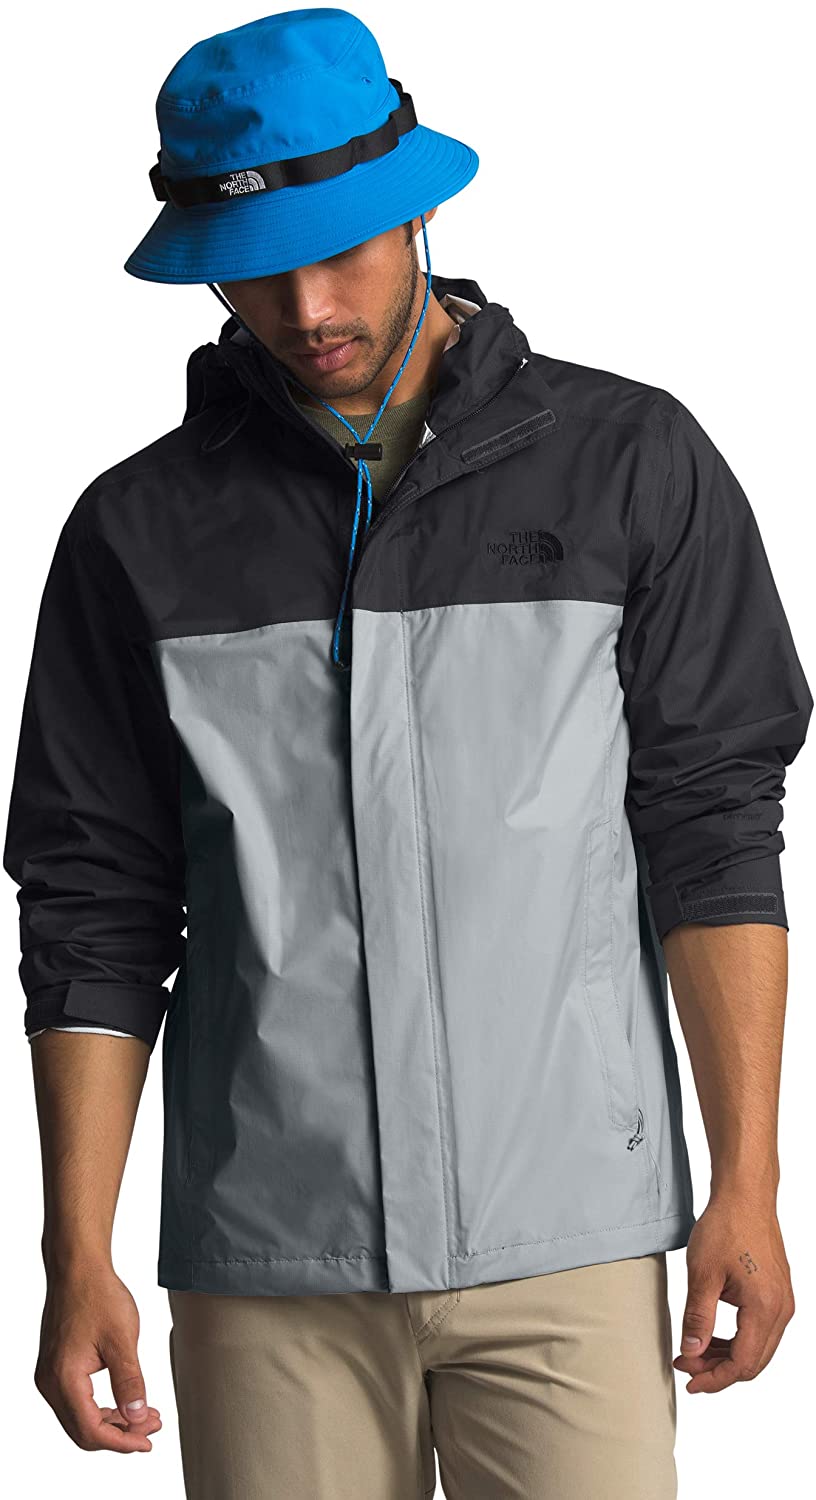 Men's The North Face Venture 2 Jacket in High Rise Grey/Asphalt Grey from the front